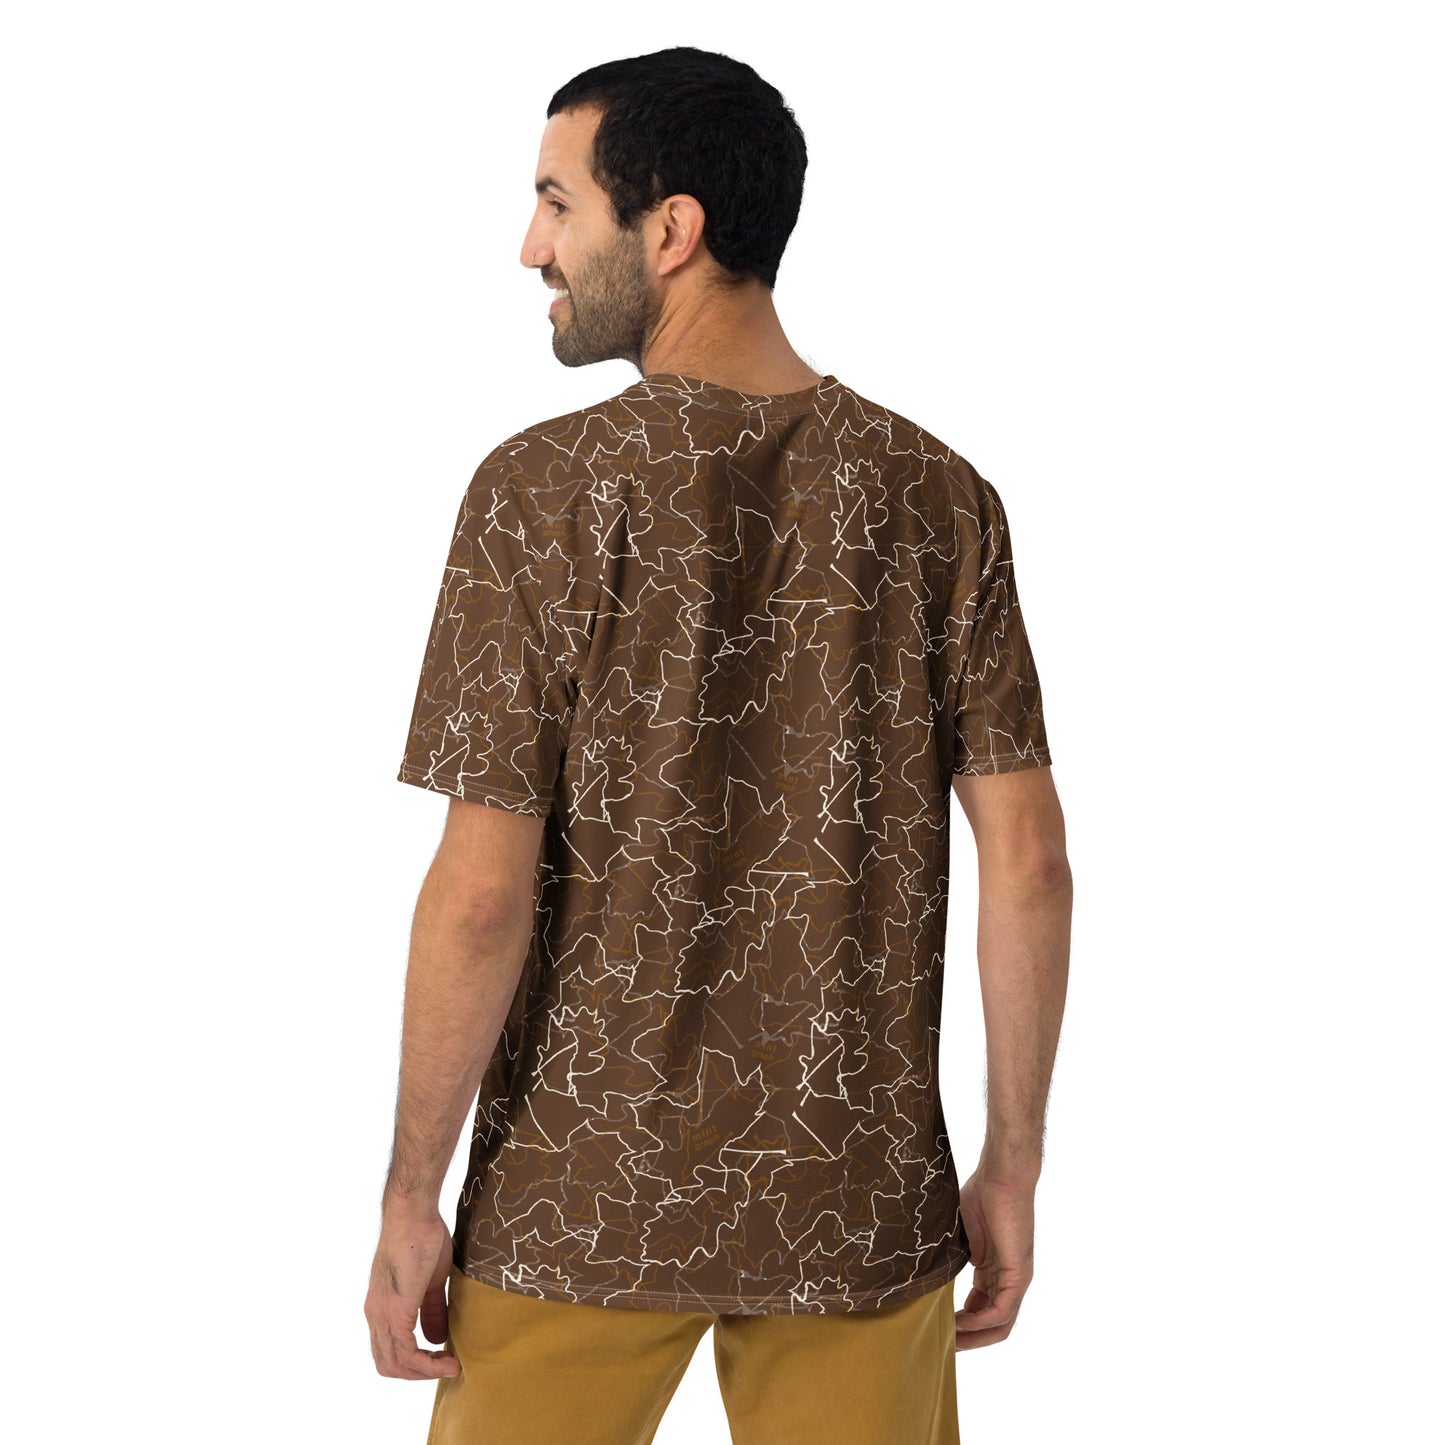 Men's t-shirt with allover print - brown leaves pattern design